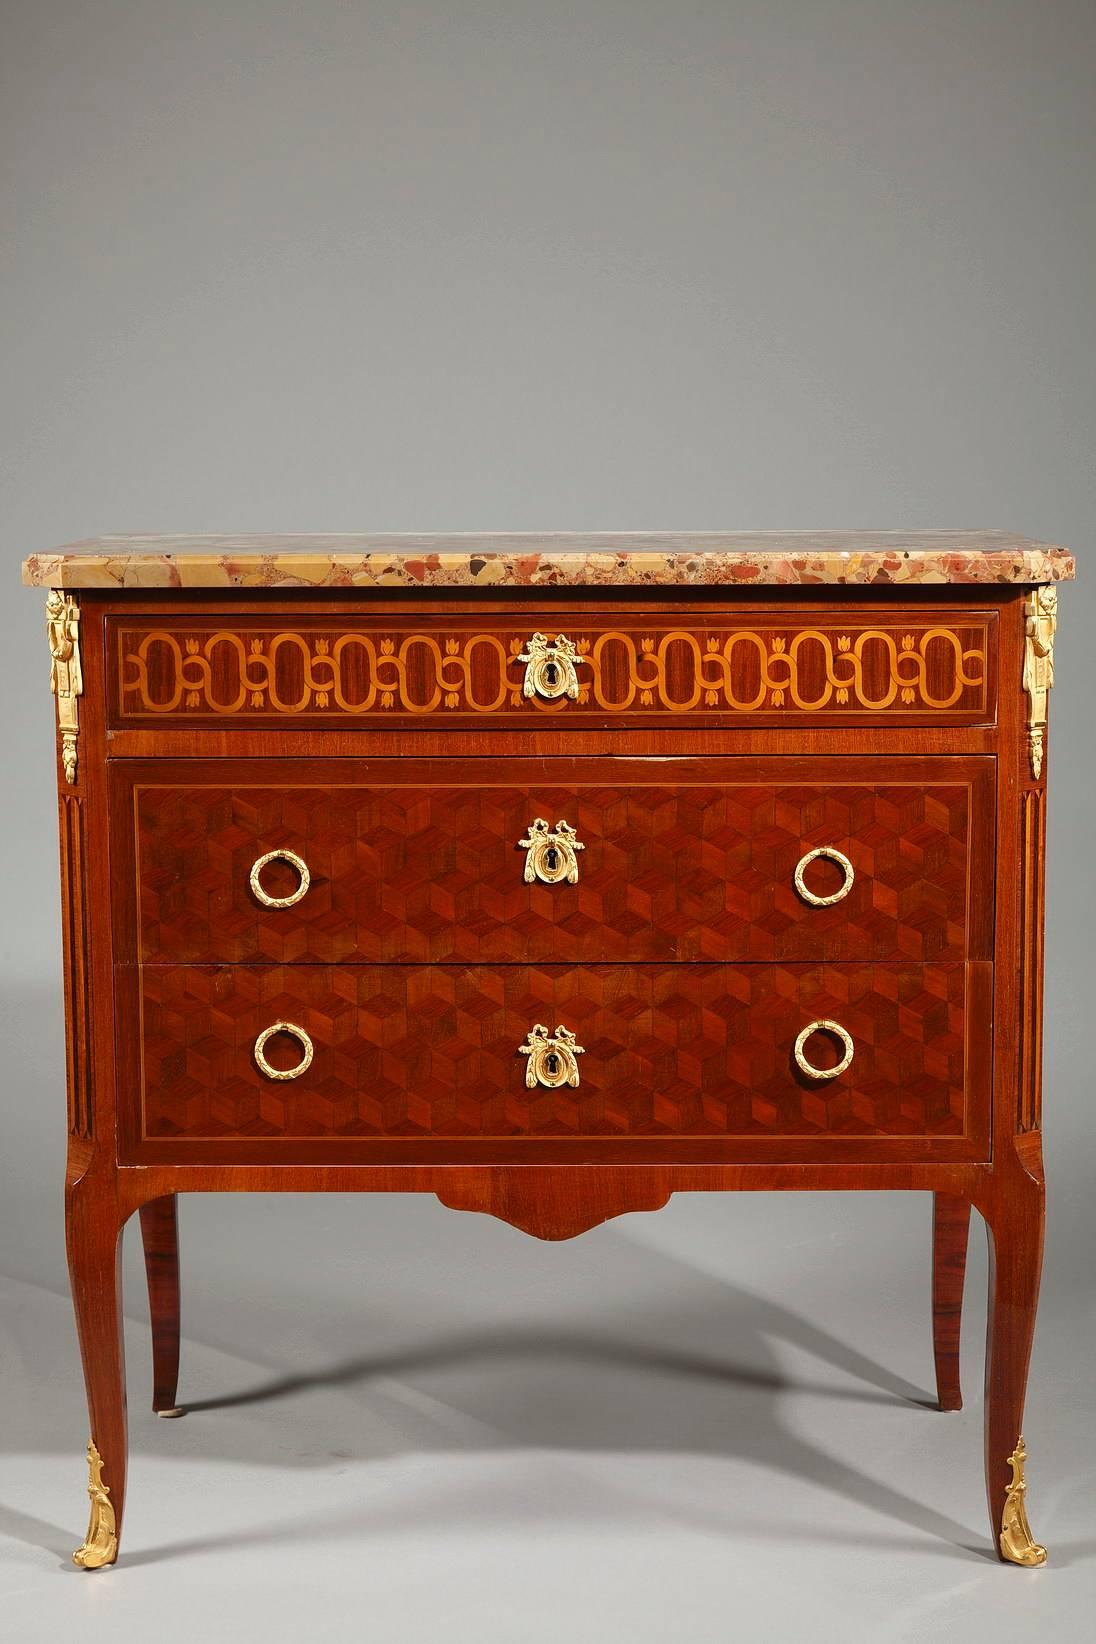 Late 19th century transitional style marquetry commode with three drawers. The set is topped with a Breche d’Alep molded marble top with canted corners. A marquetry motif of interlacing and flowers runs under the marble top across the sides and top